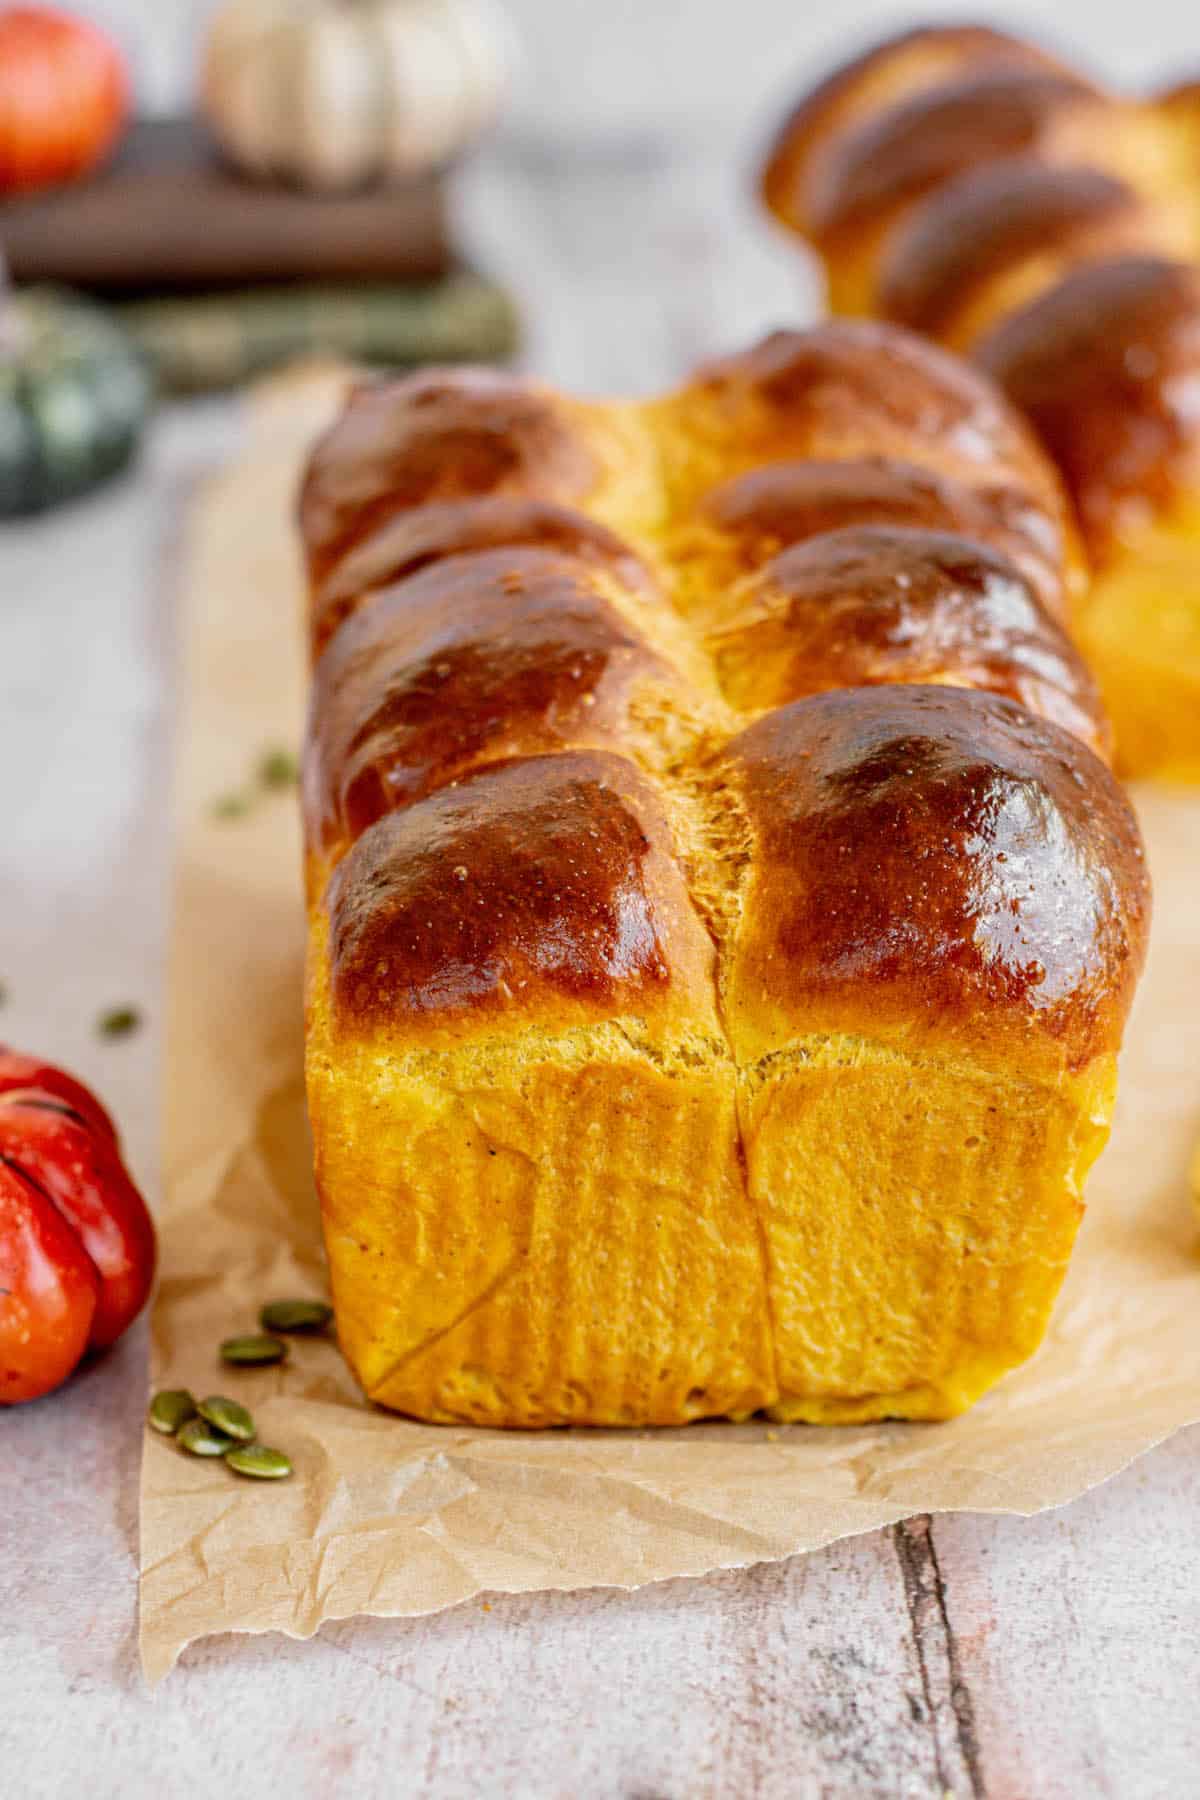 Glistening pumpkin brioche loaf with a golden crust, placed on parchment paper surrounded by scattered pumpkin seeds, with blurred autumnal decorations in the background.